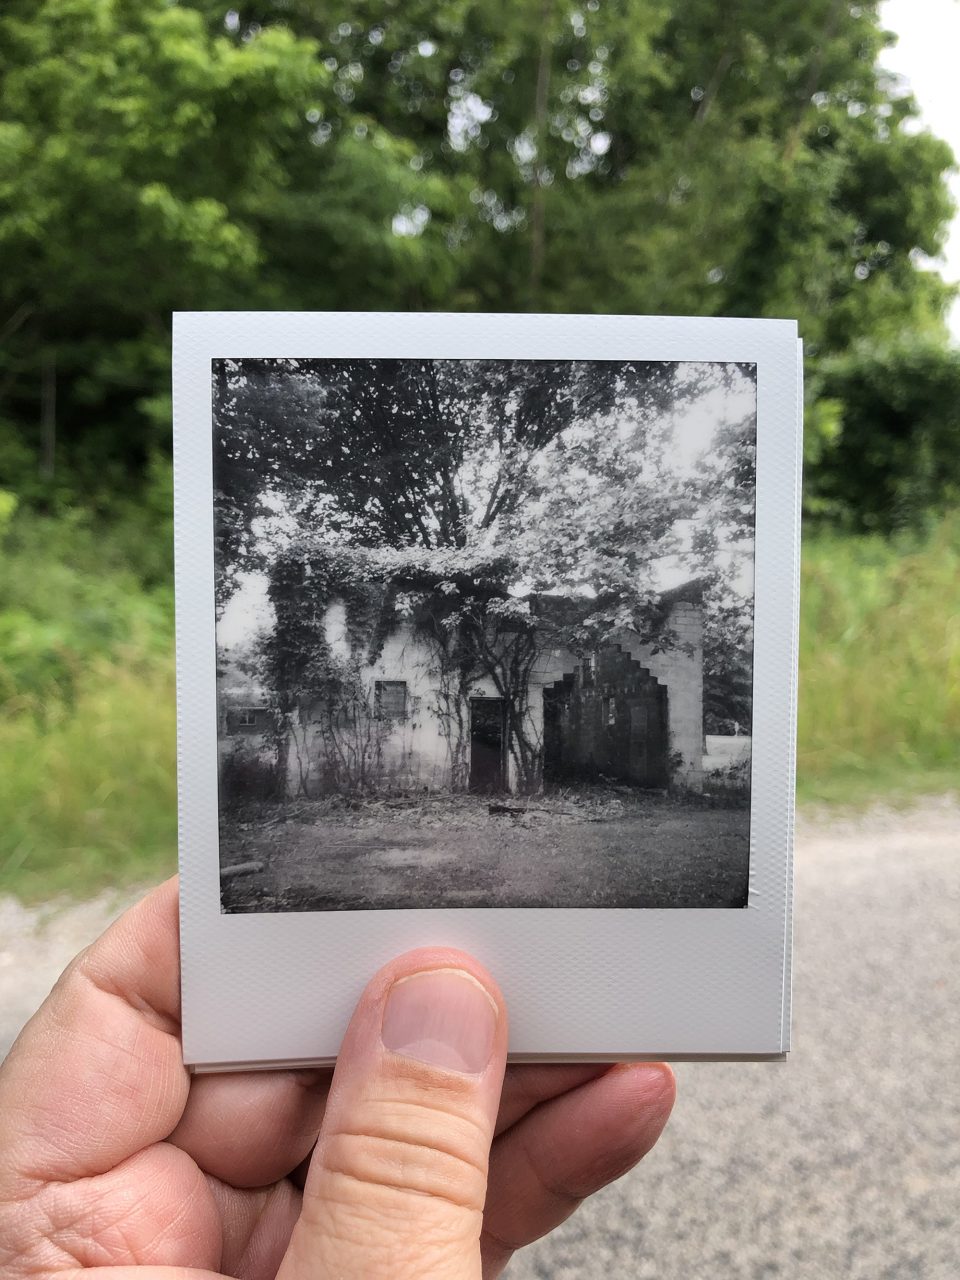 Black and white Polaroid photograph of an abandoned building with ivy vines over it.